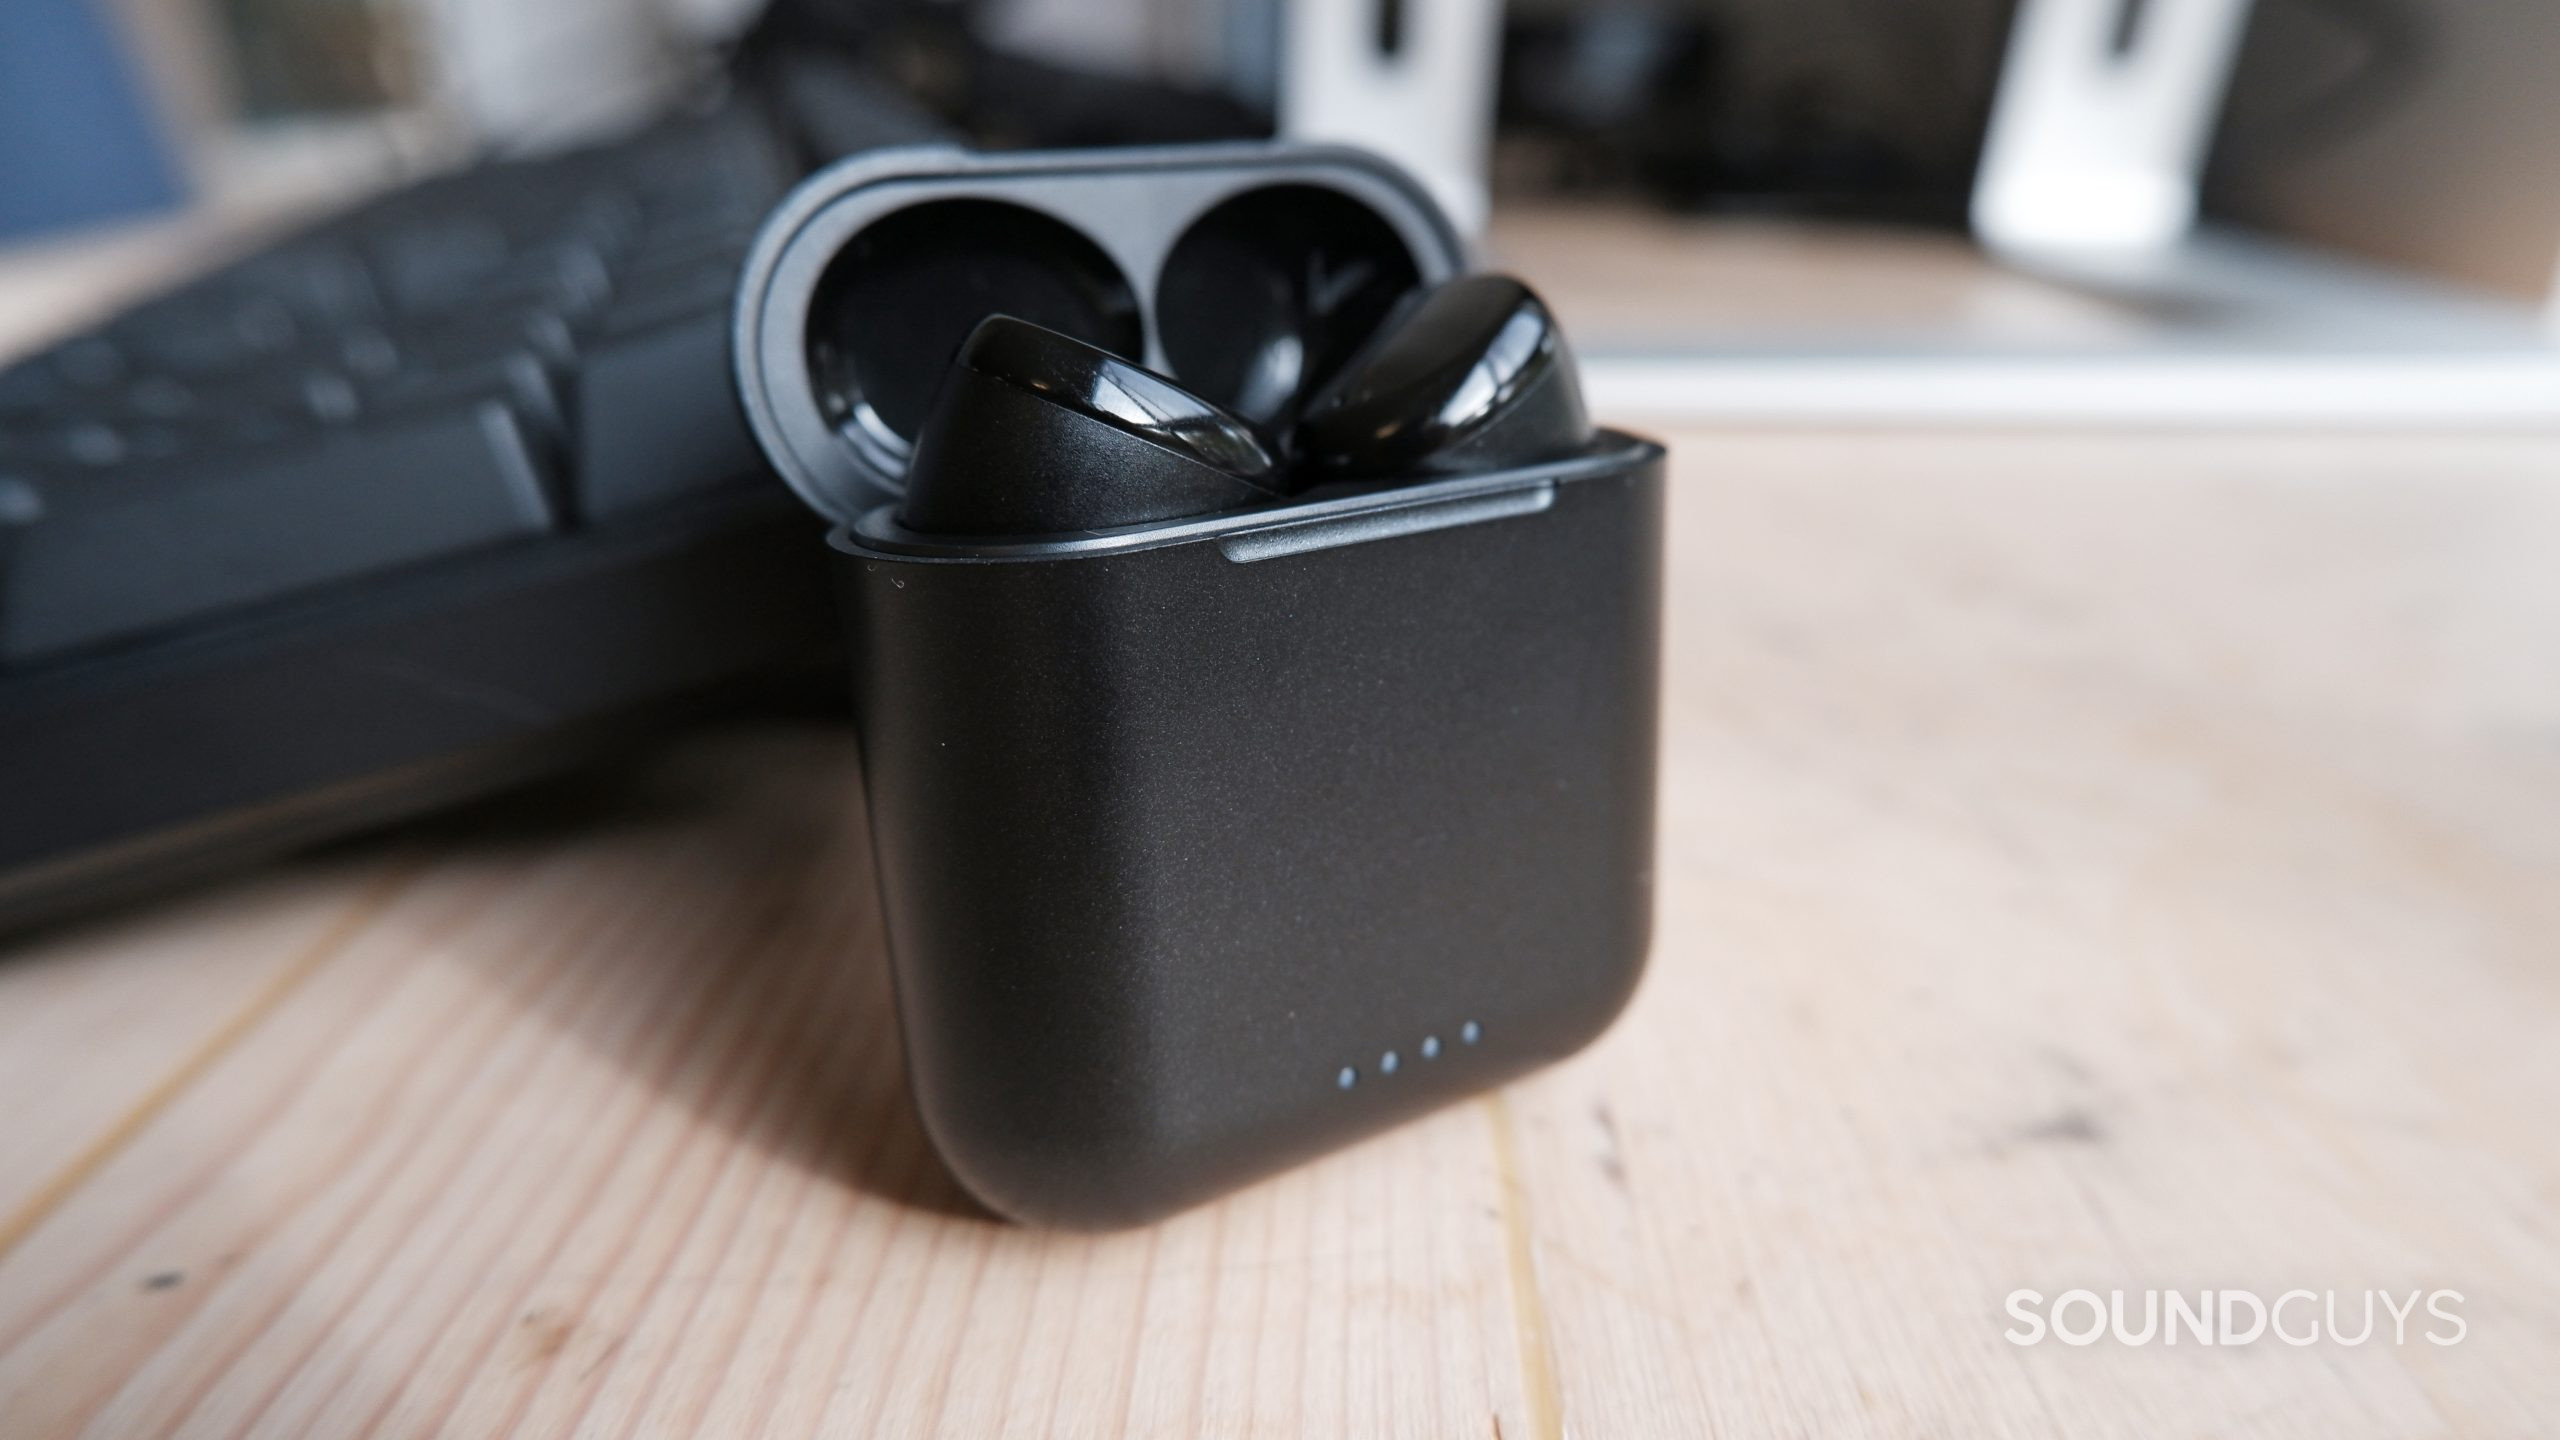 The TOZO T6 case open on a desk with the earbuds inside the case.